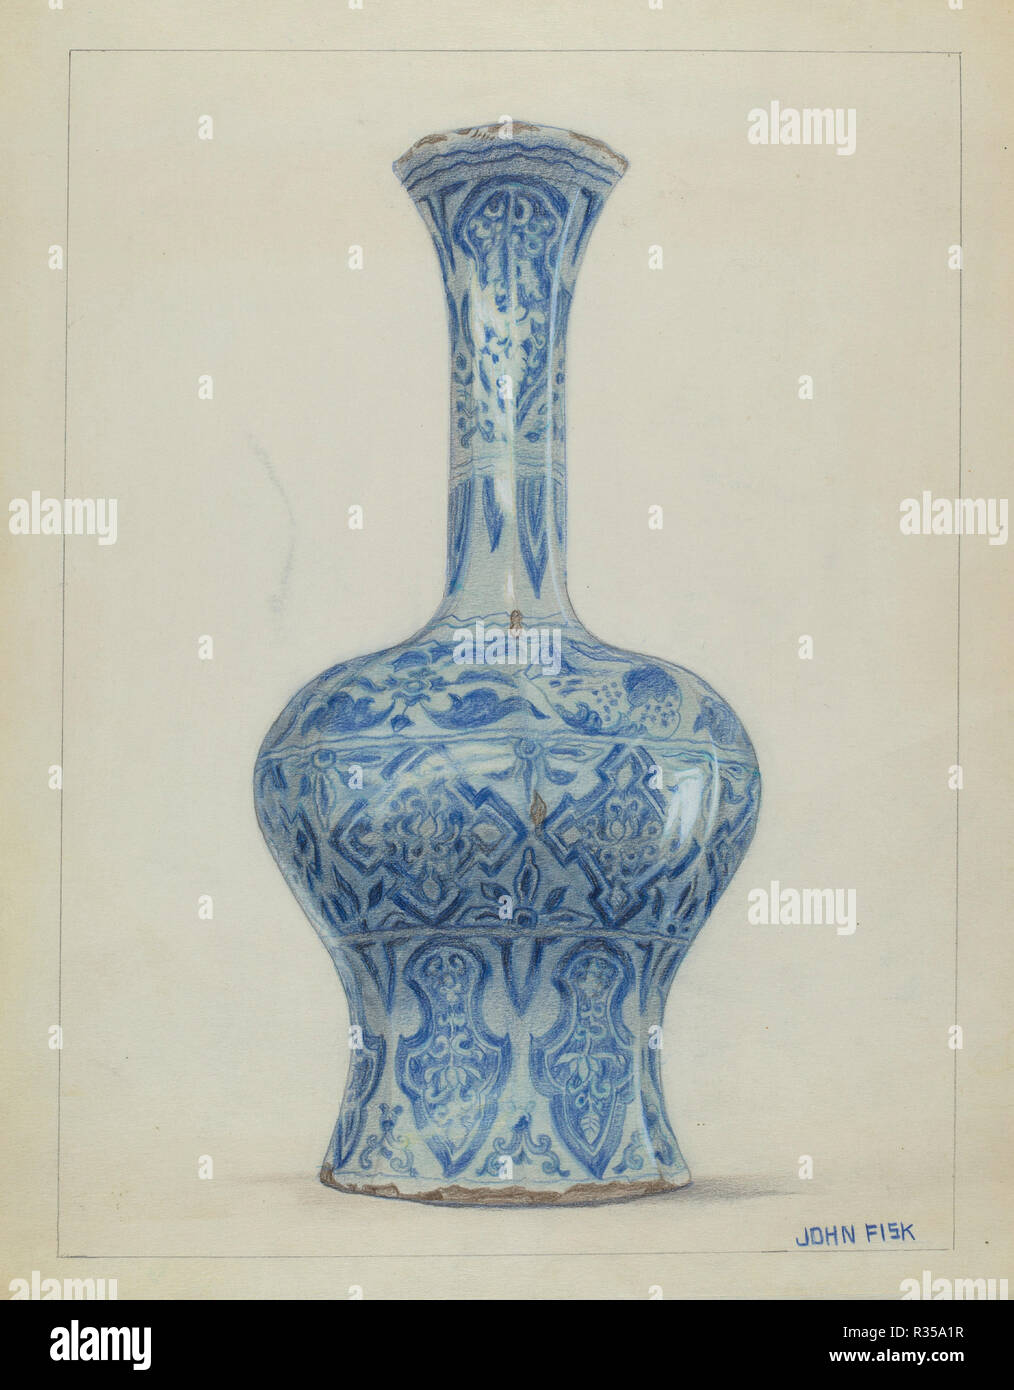 Porcelain Vase. Dated: 1936. Dimensions: overall: 29.4 x 22.3 cm (11 9/16 x 8 3/4 in.). Medium: watercolor, graphite, and colored pencil on paper. Museum: National Gallery of Art, Washington DC. Author: John Fisk. Stock Photo